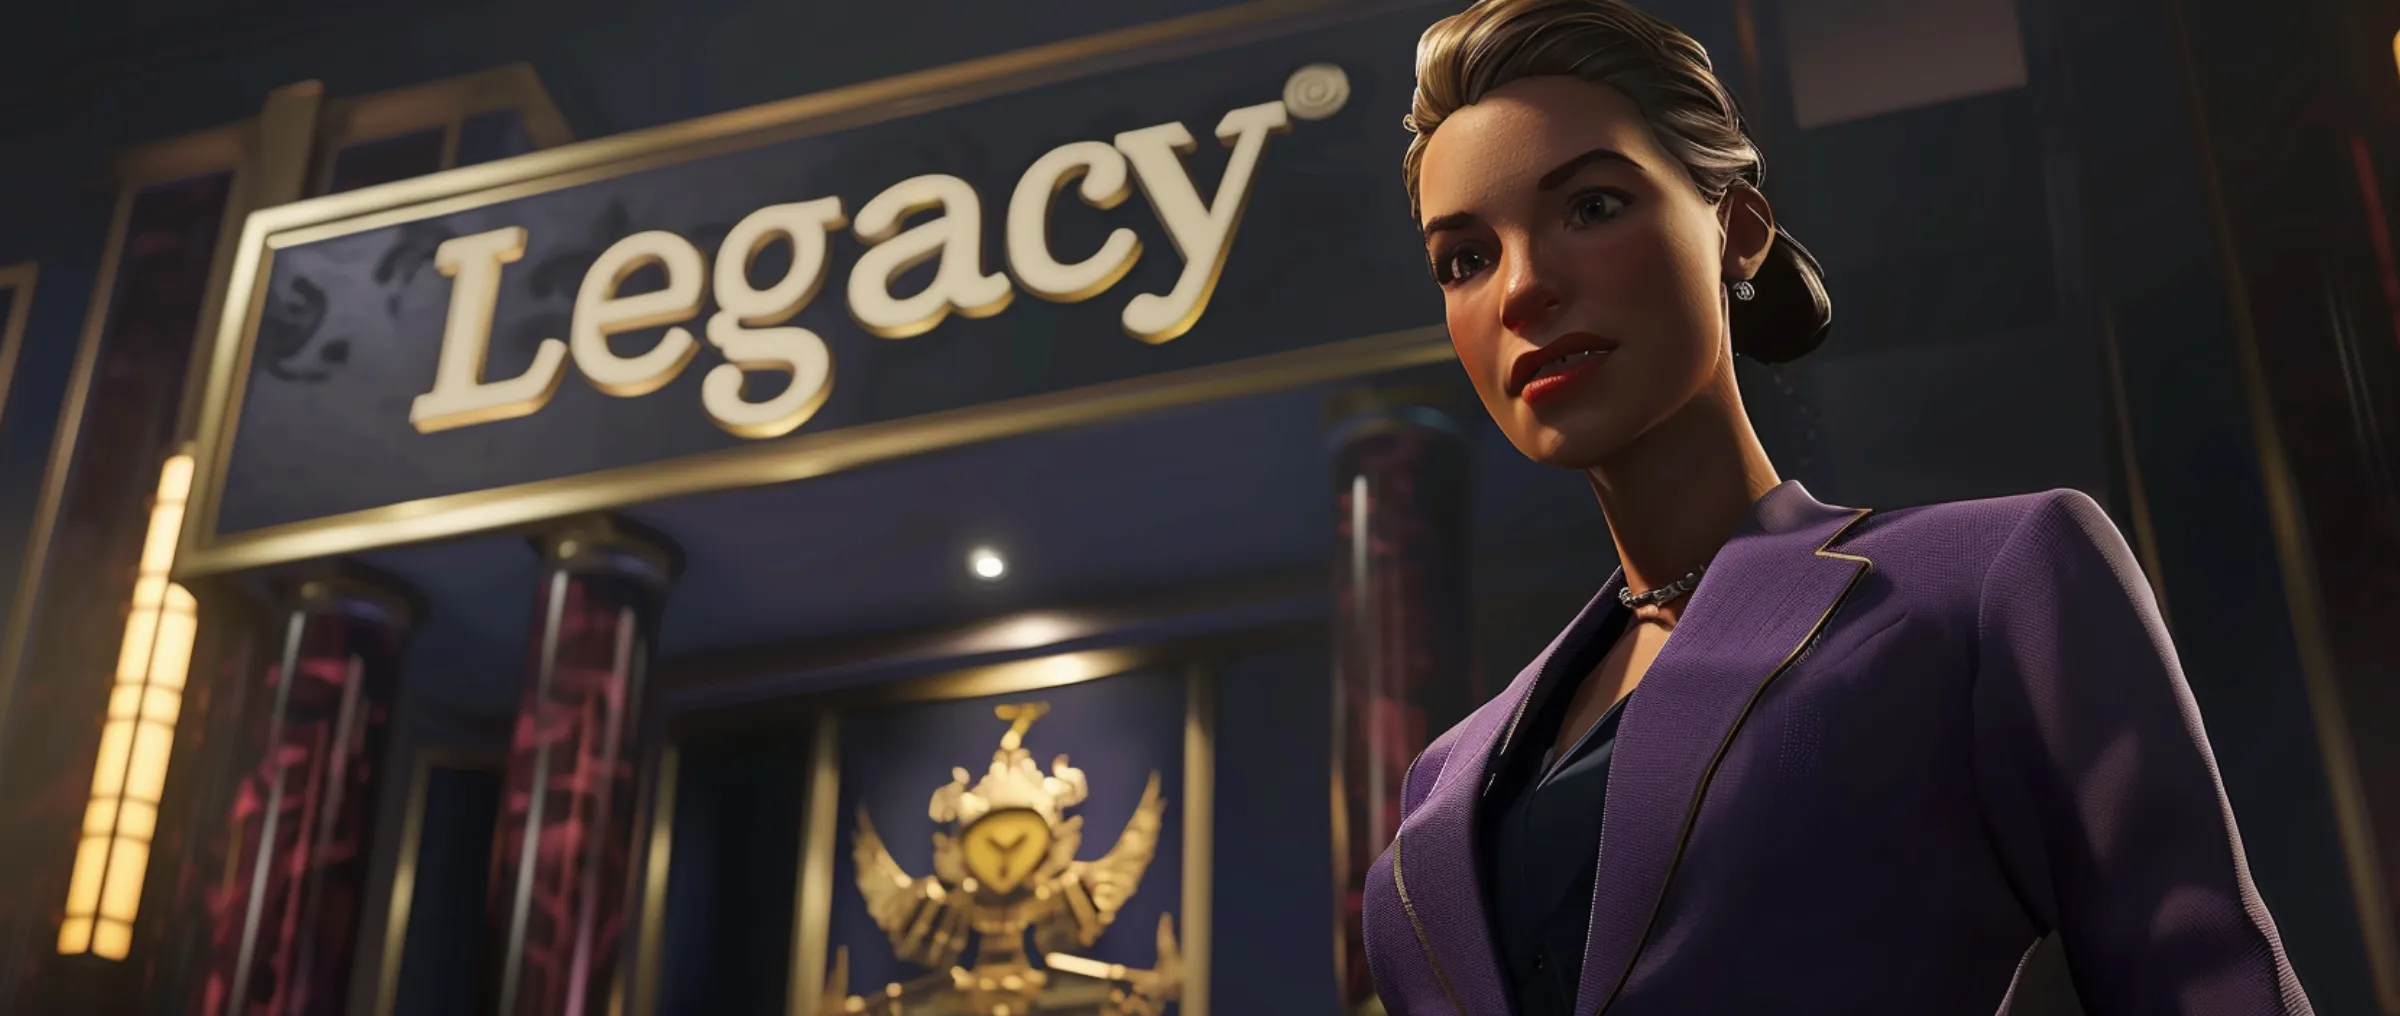 Gala Games Launches "Legacy": A Breakthrough in Business Simulation